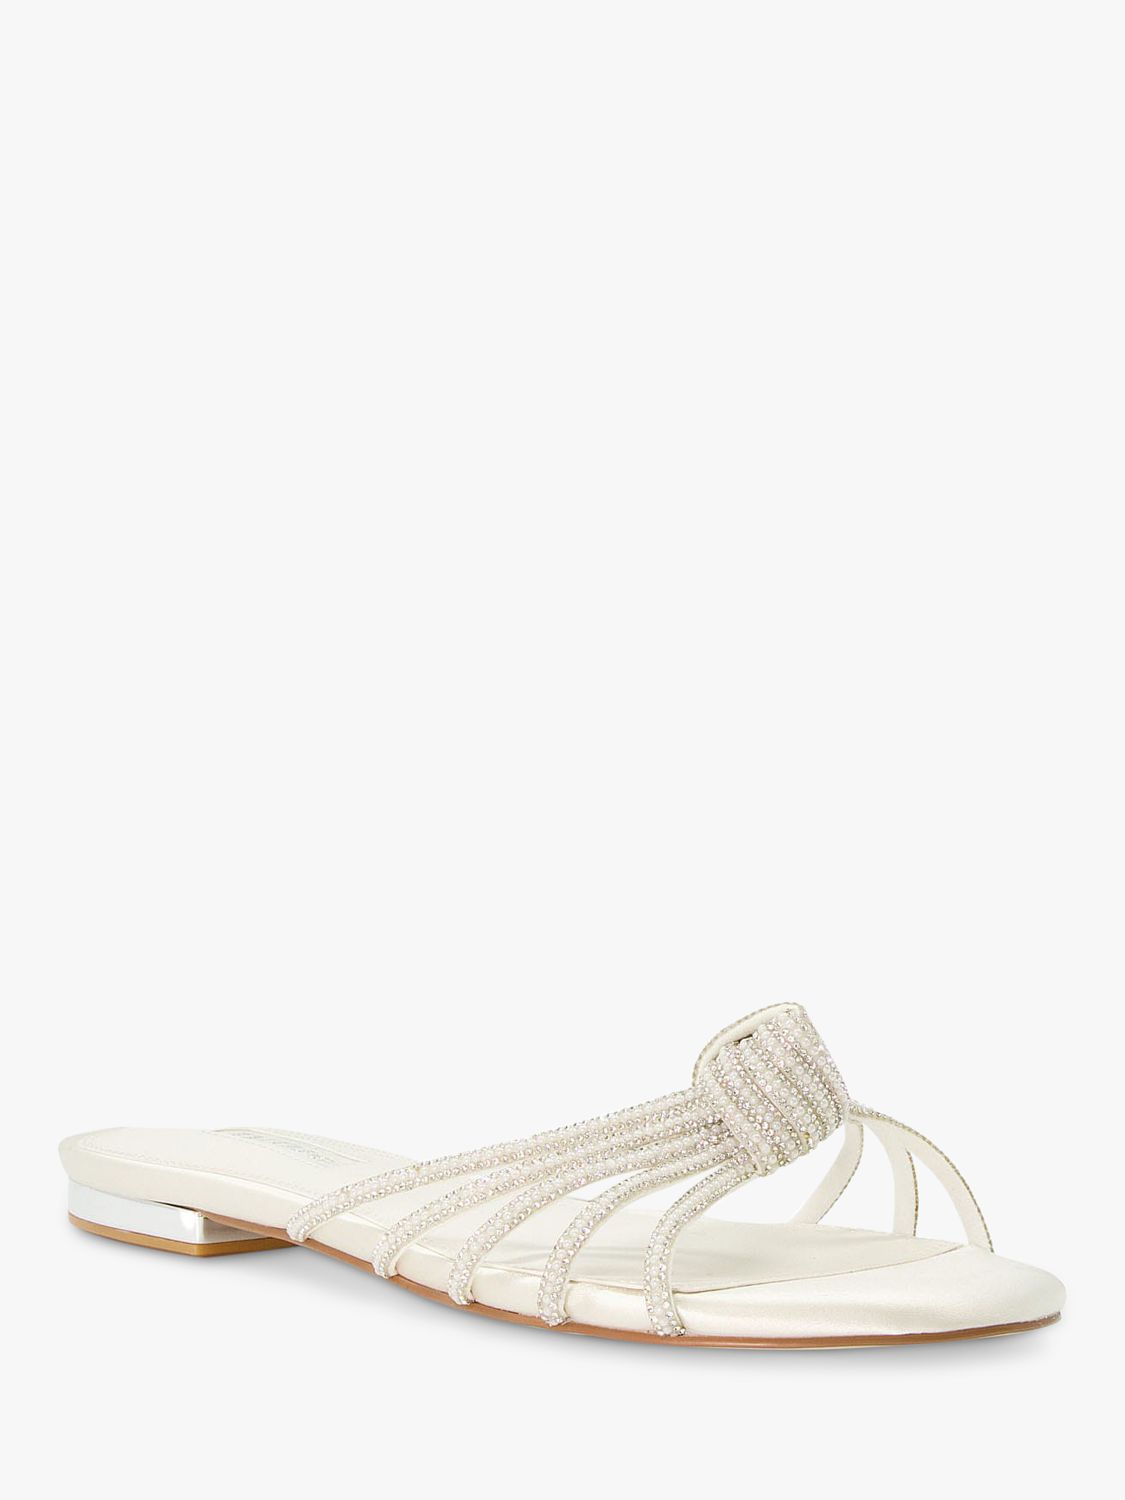 Dune Bridal Collection Newlie Crystal Knot Flat Satin Sandals, Ivory, 3